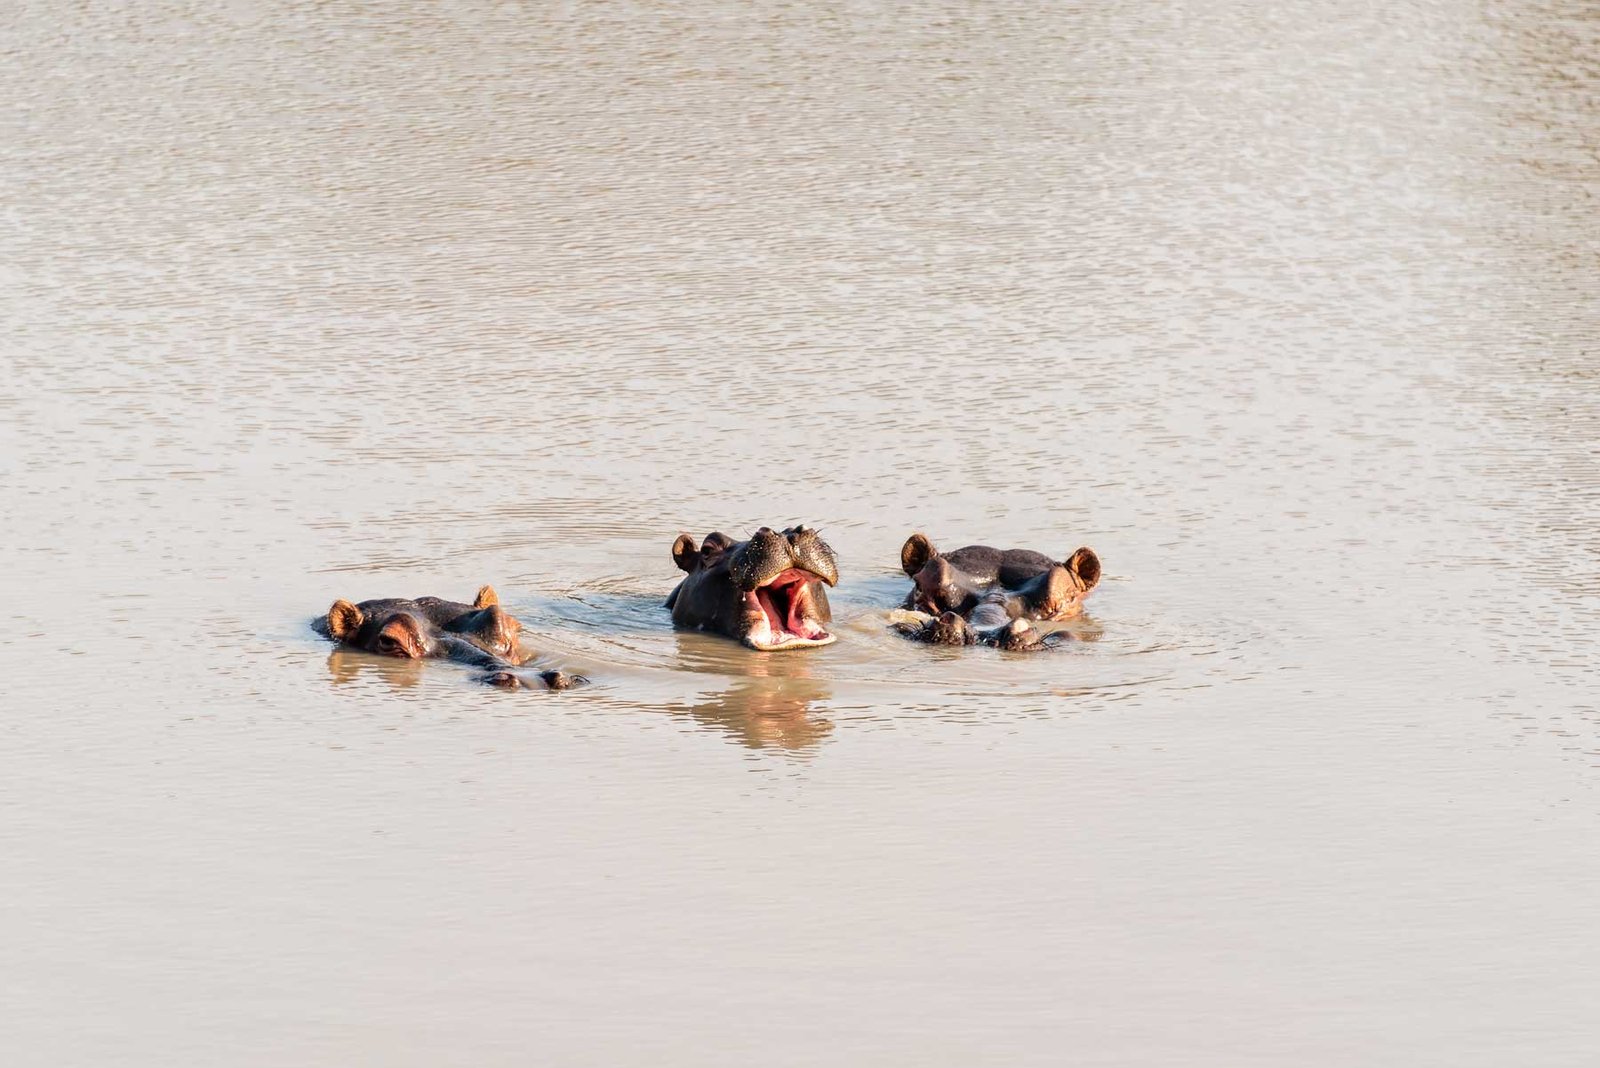 Family of Hippos in Kruger Park (Phelwana Game Lodge). South Africa in 3 Weeks | The Perfect South Africa itinerary for your first trip.